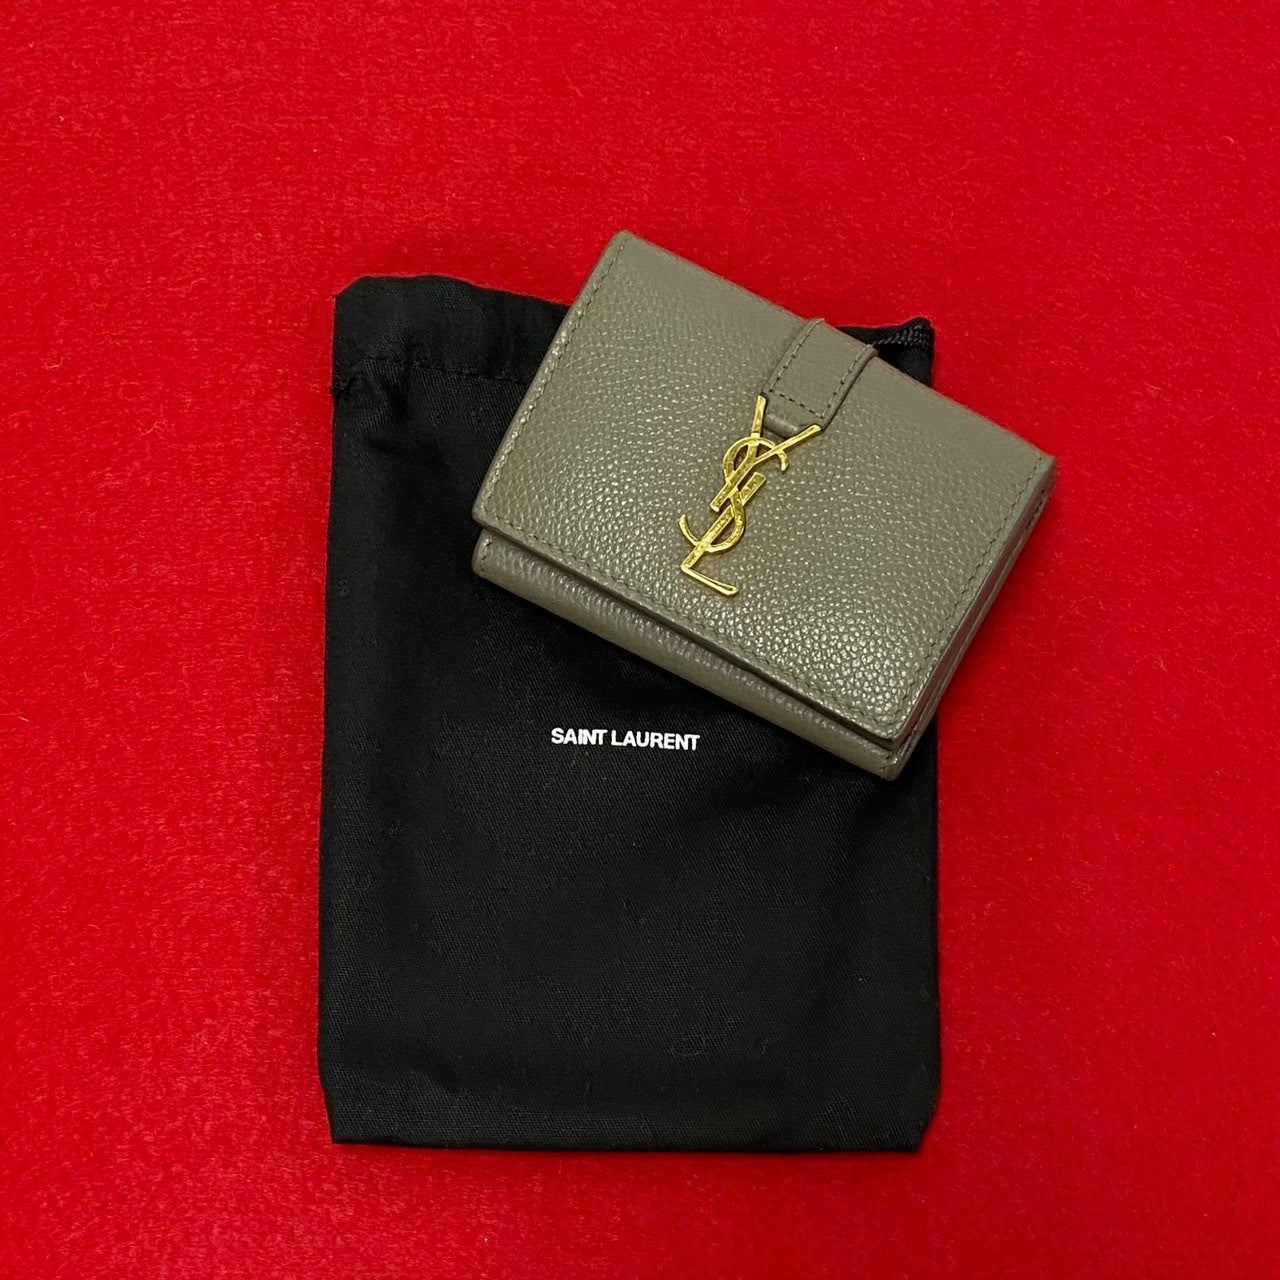 Yves Saint Laurent Leather Origami Tiny Wallet Leather Short Wallet in Good condition